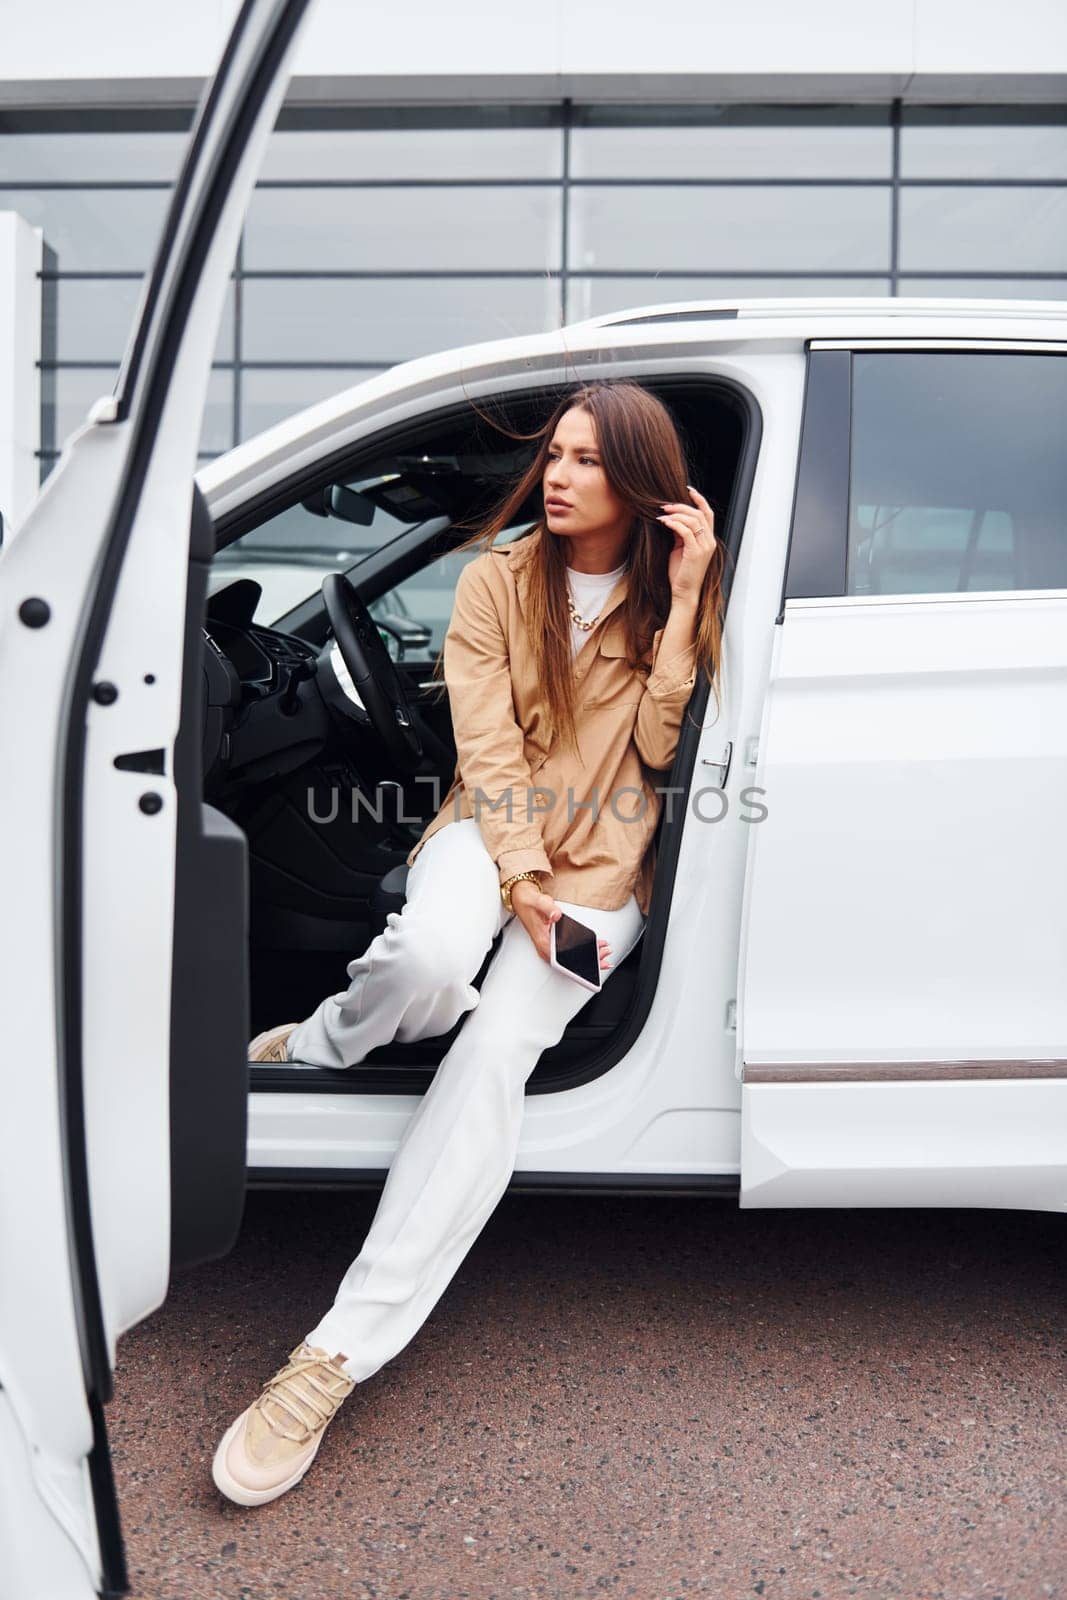 Outdoors against modern building. Fashionable beautiful young woman and her modern automobile.